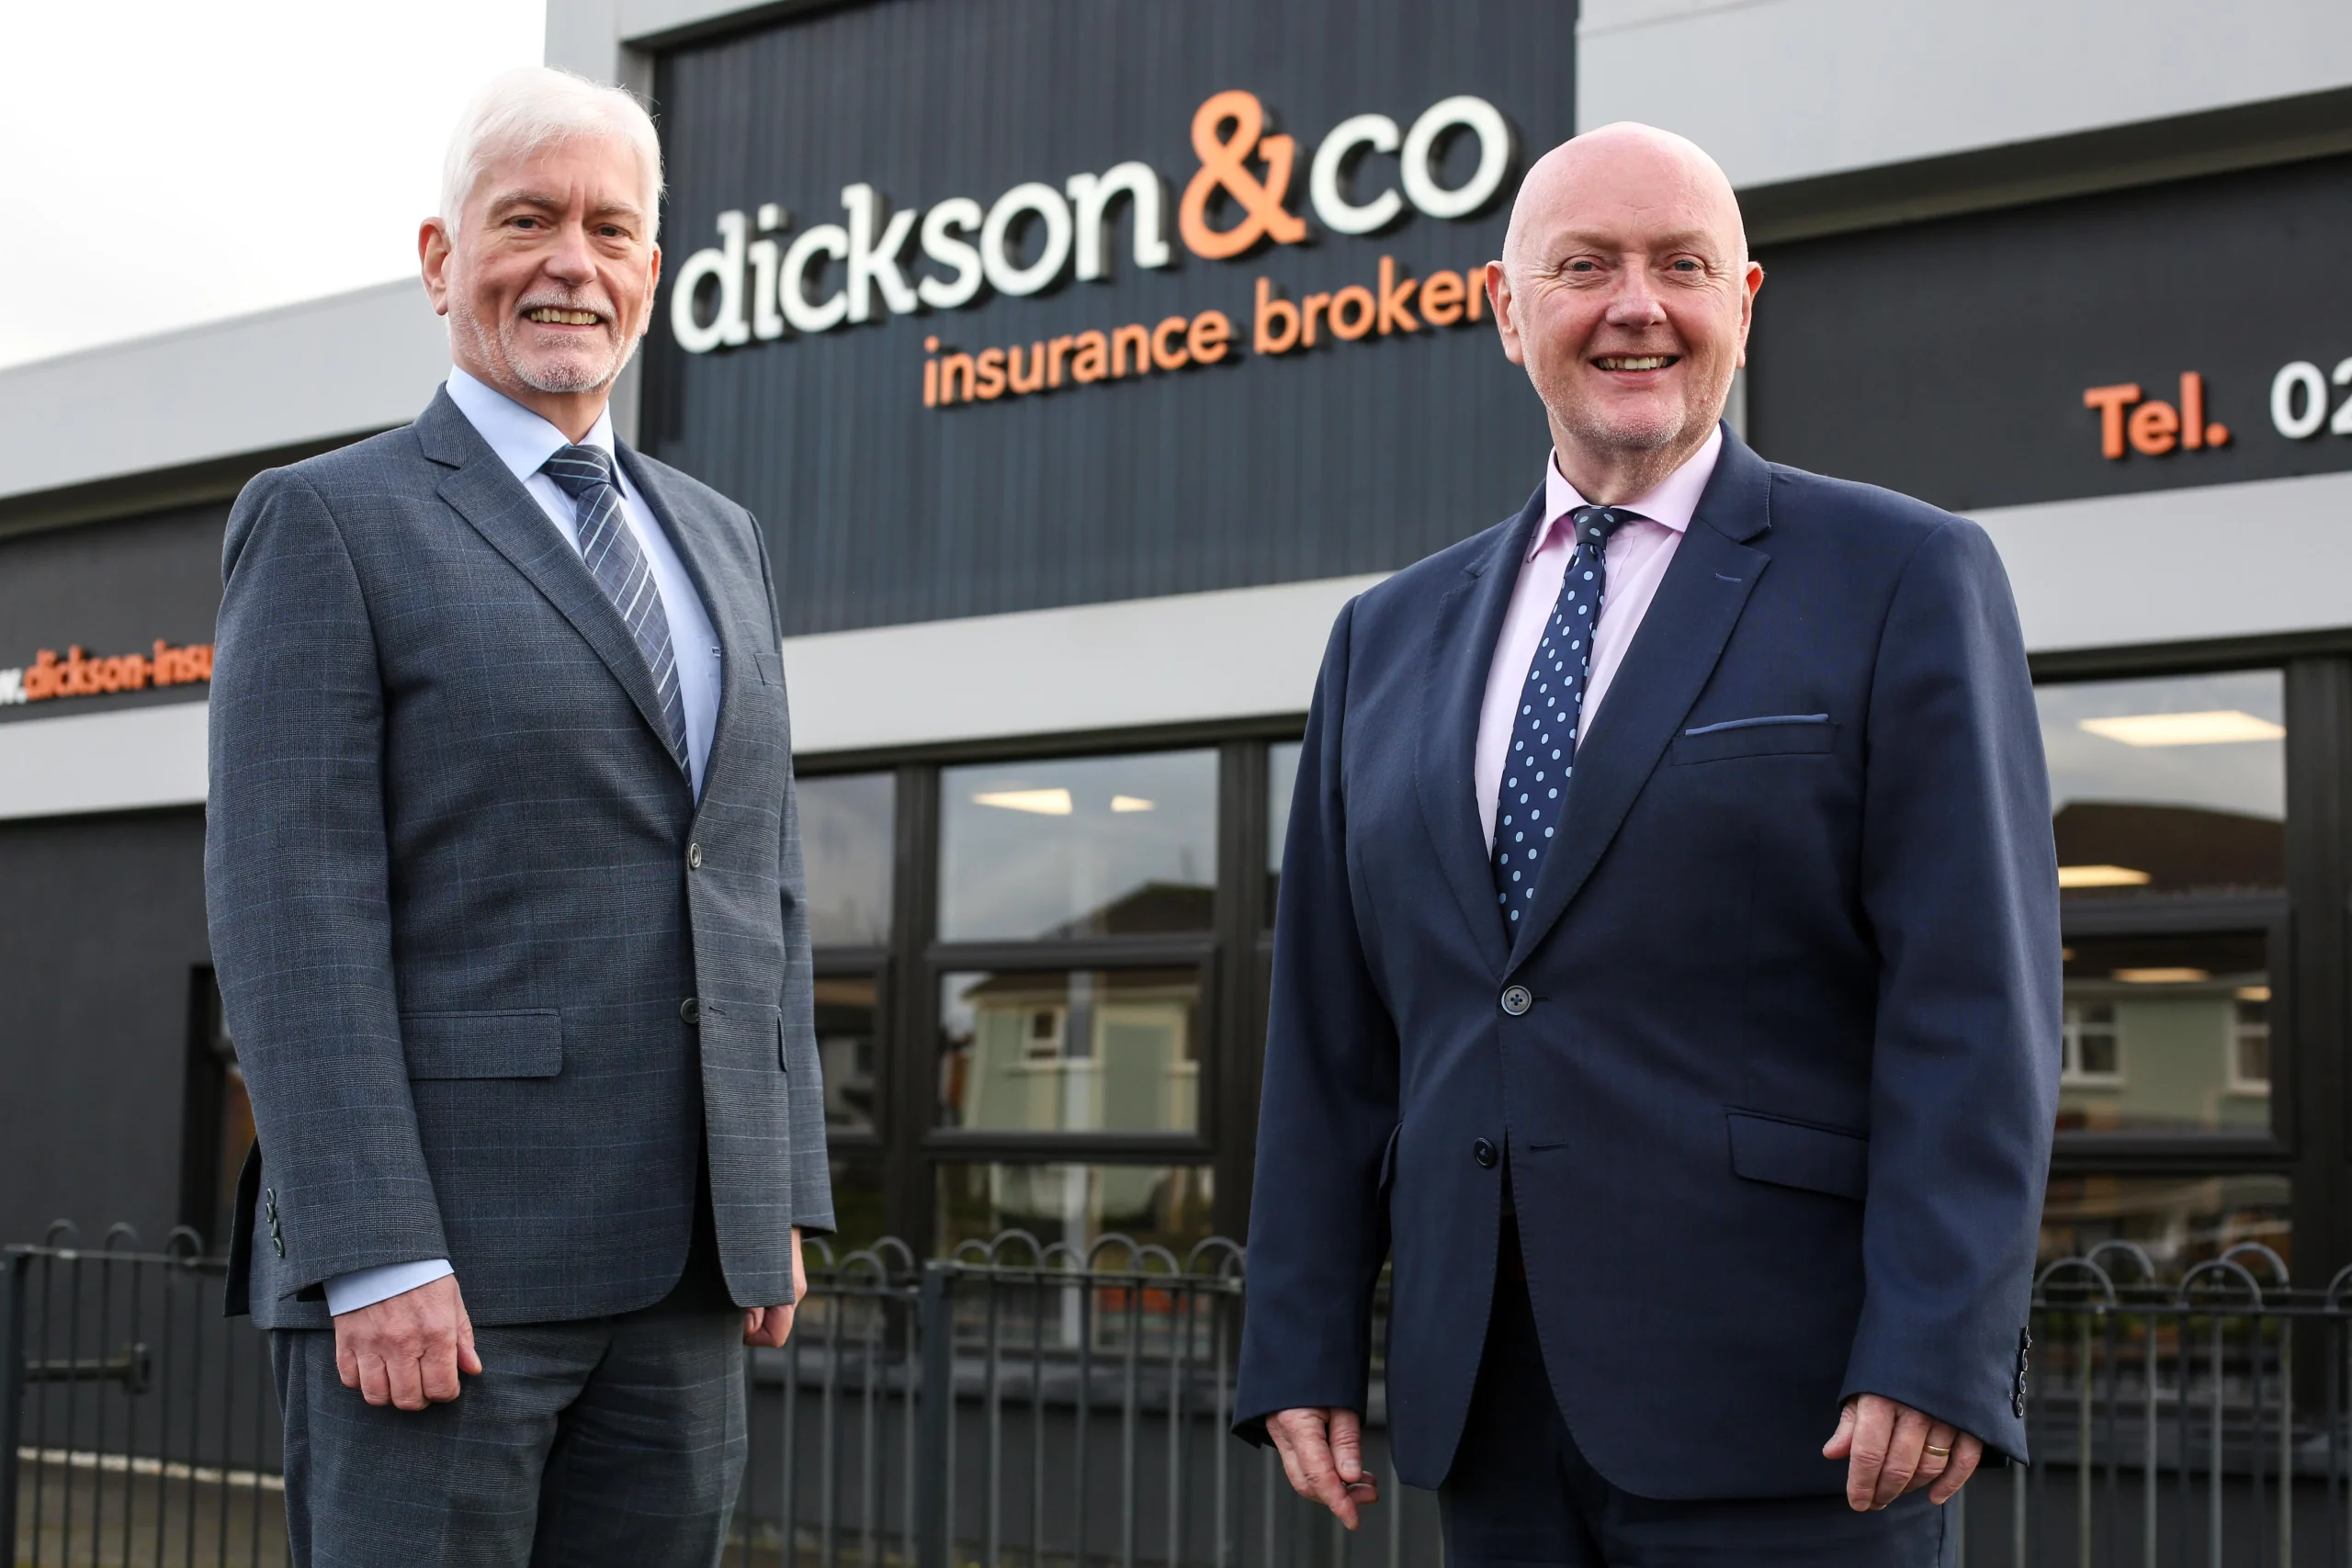 Dickson & Co and Kerr Group